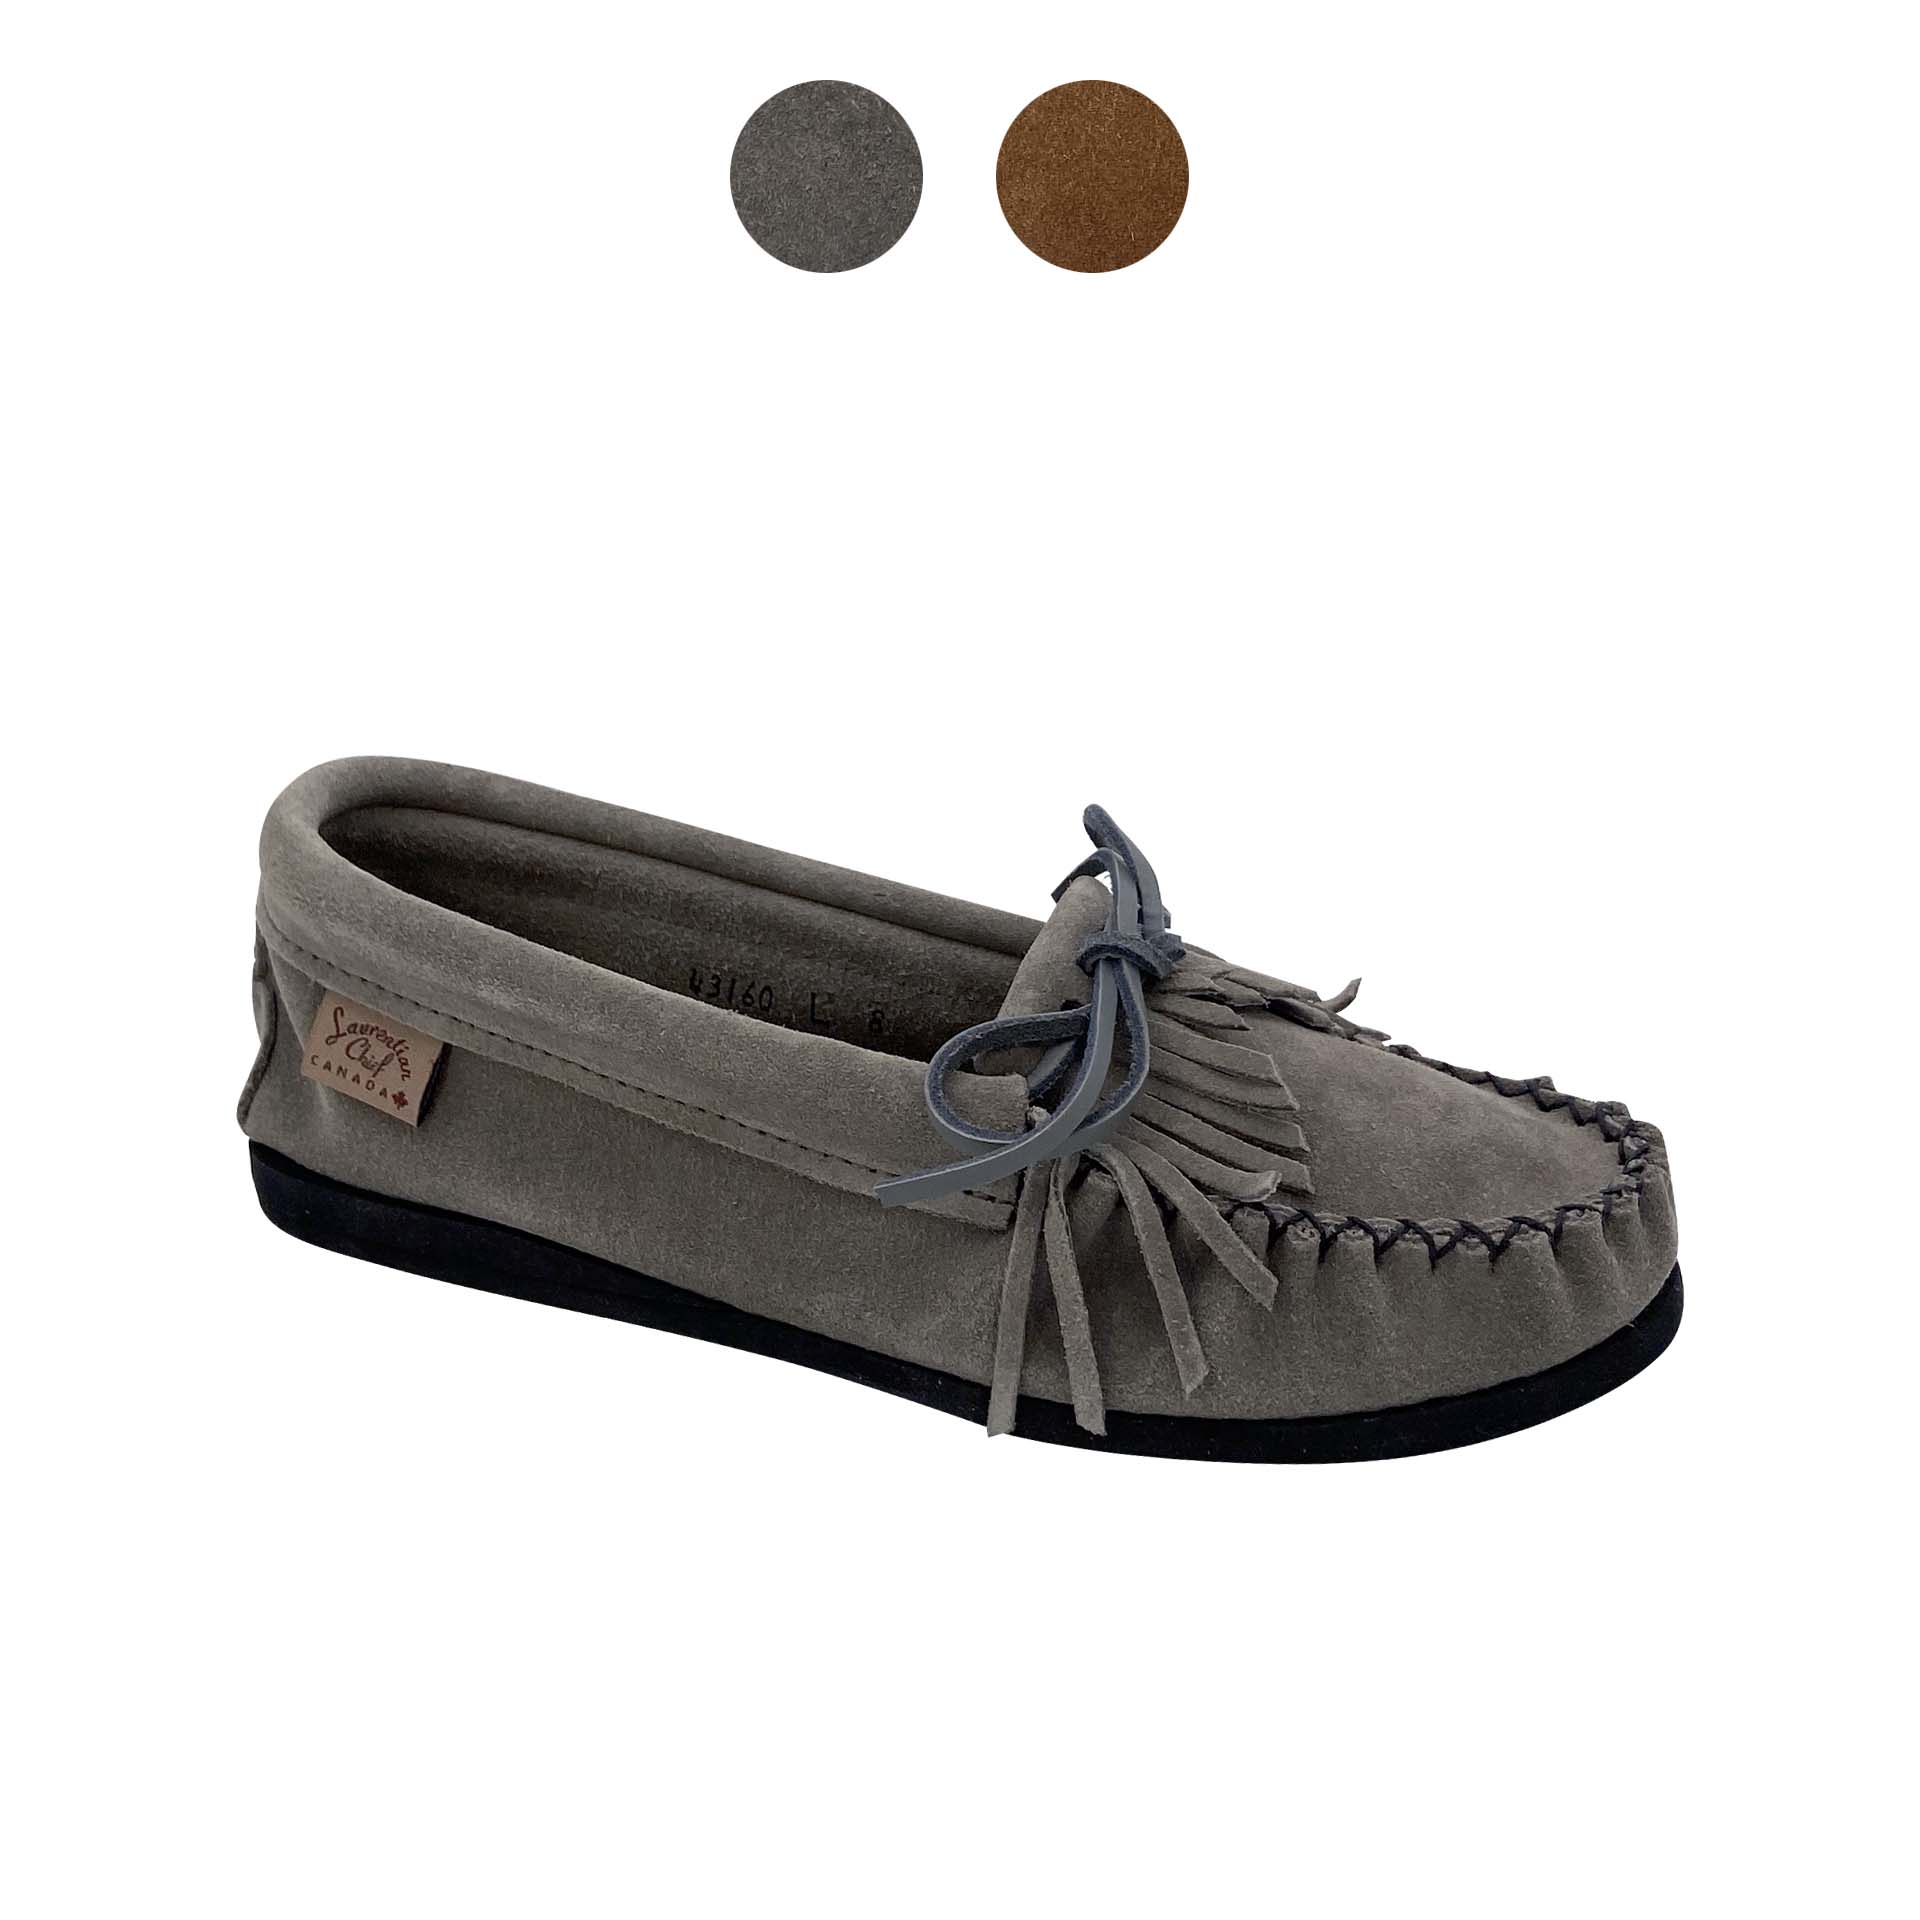 Women's Earthing Moccasin Shoes with Copper Rivet Fringed Crepe Sole